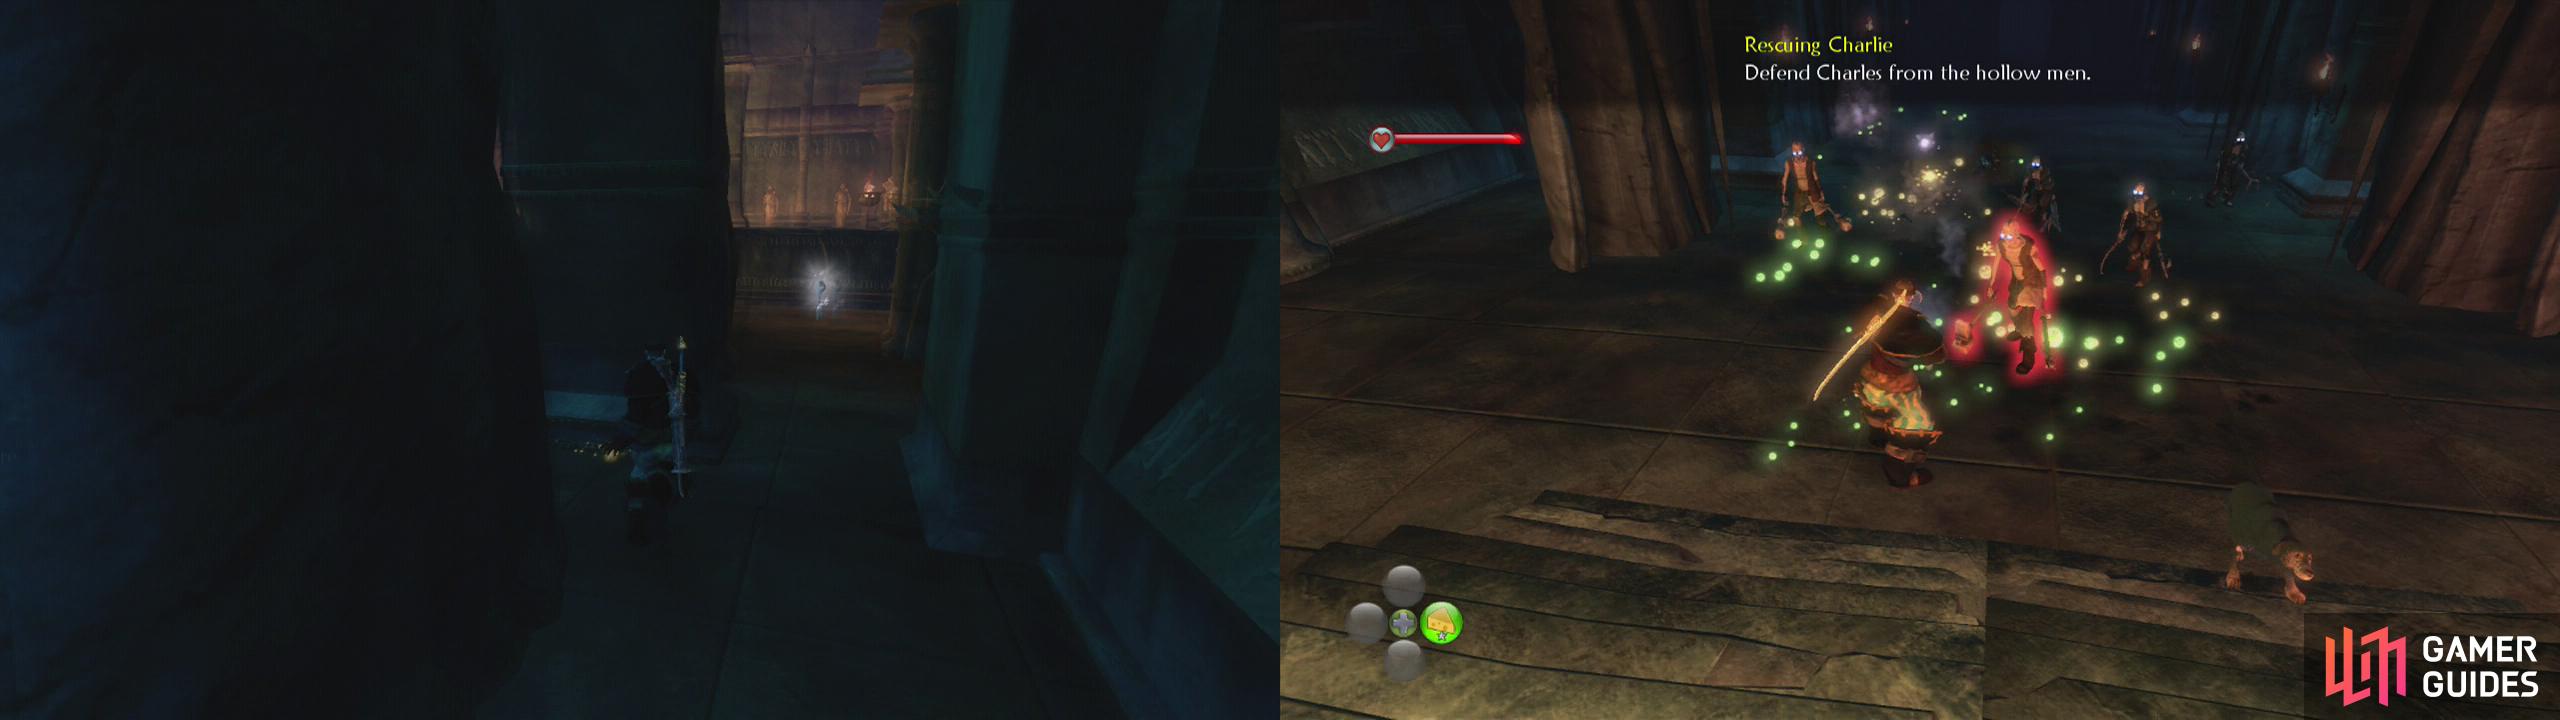 Find the silver key in the main room (left) and then defend Charlie as he attempts to open the chest on the raised platfrom (right).